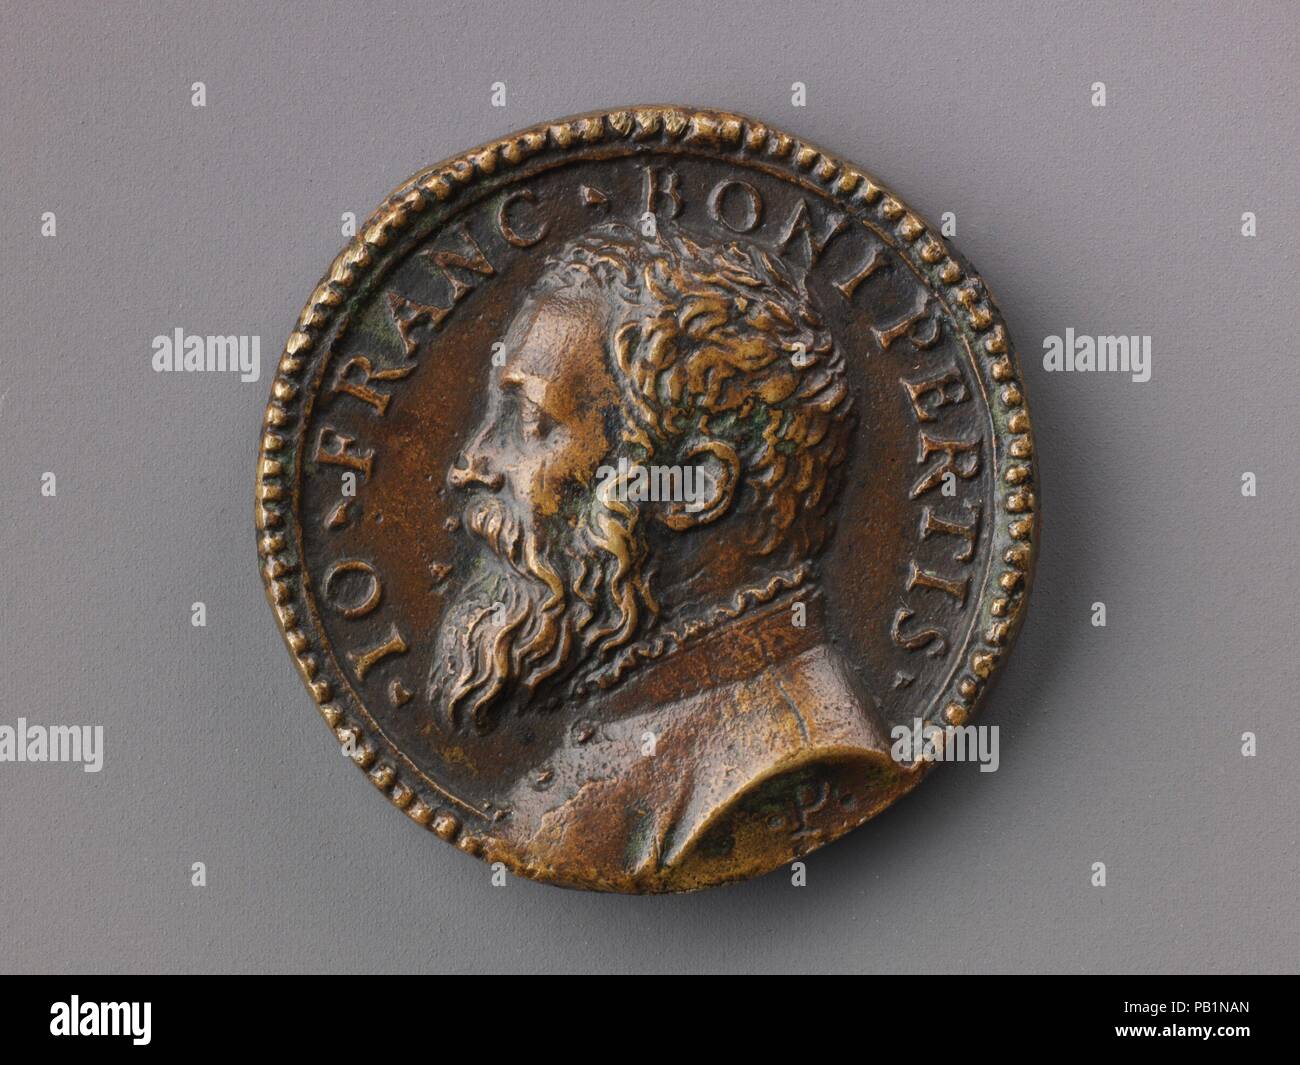 Medal:  Bust of Gianfrancesco Boniperti. Artist: Pastorino de Pastorini (Italian, Castelnuovo della Berardenga 1508-1592 Florence). Dimensions: Diam. 3.9 cm, wt. 26.02 g.. Date: model ca. 1550 (contemporary cast).  Pastorino de Pastorini was an Italian medallist, glass painter and die engraver. One of the most prolific Italian medallists, he produced around 200 medals. He was active in Ferrara, Bologna, Novellara, and Florence. On the obverse is a portrait of Gianfrancesco Boniperti (dates unknown); the reverse portrays an apple on a branch, which may have been his personal emblem. Museum: Met Stock Photo